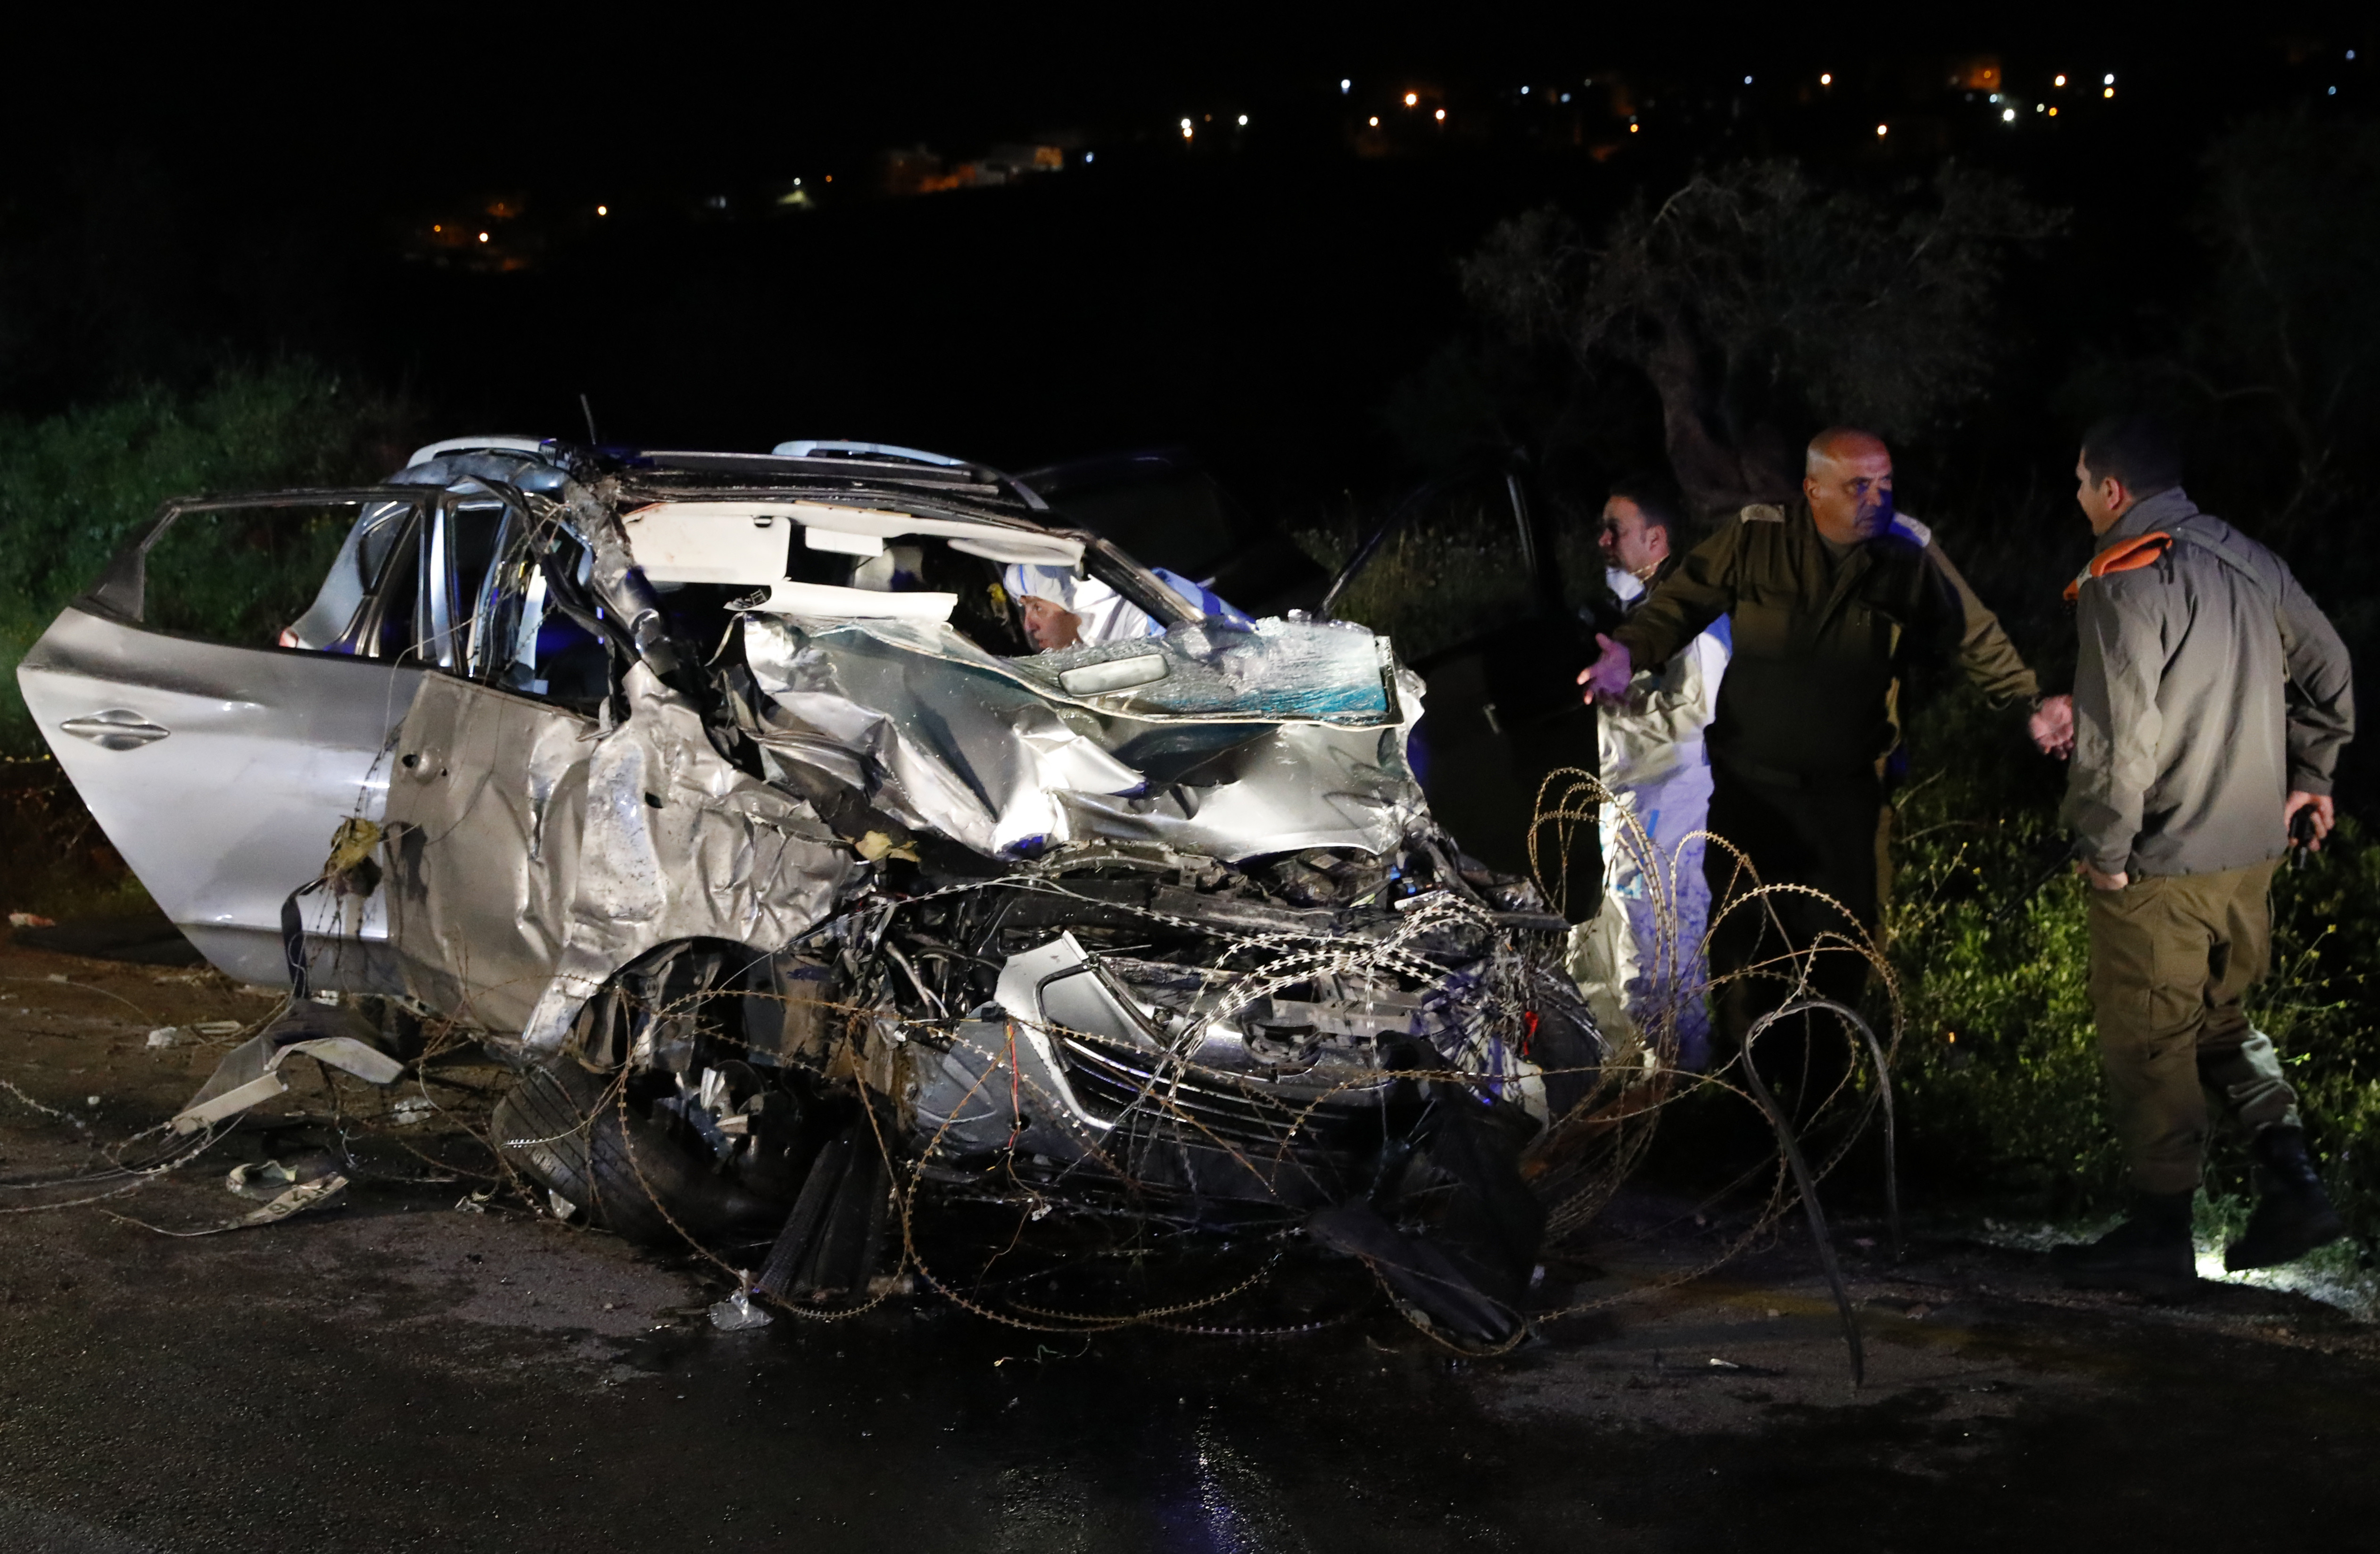 Israeli security forces inspect the vehicle that was used by a Palestinian assailant in a car ramming attack in the West Bank on March 16, 2018. (JACK GUEZ / AFP)